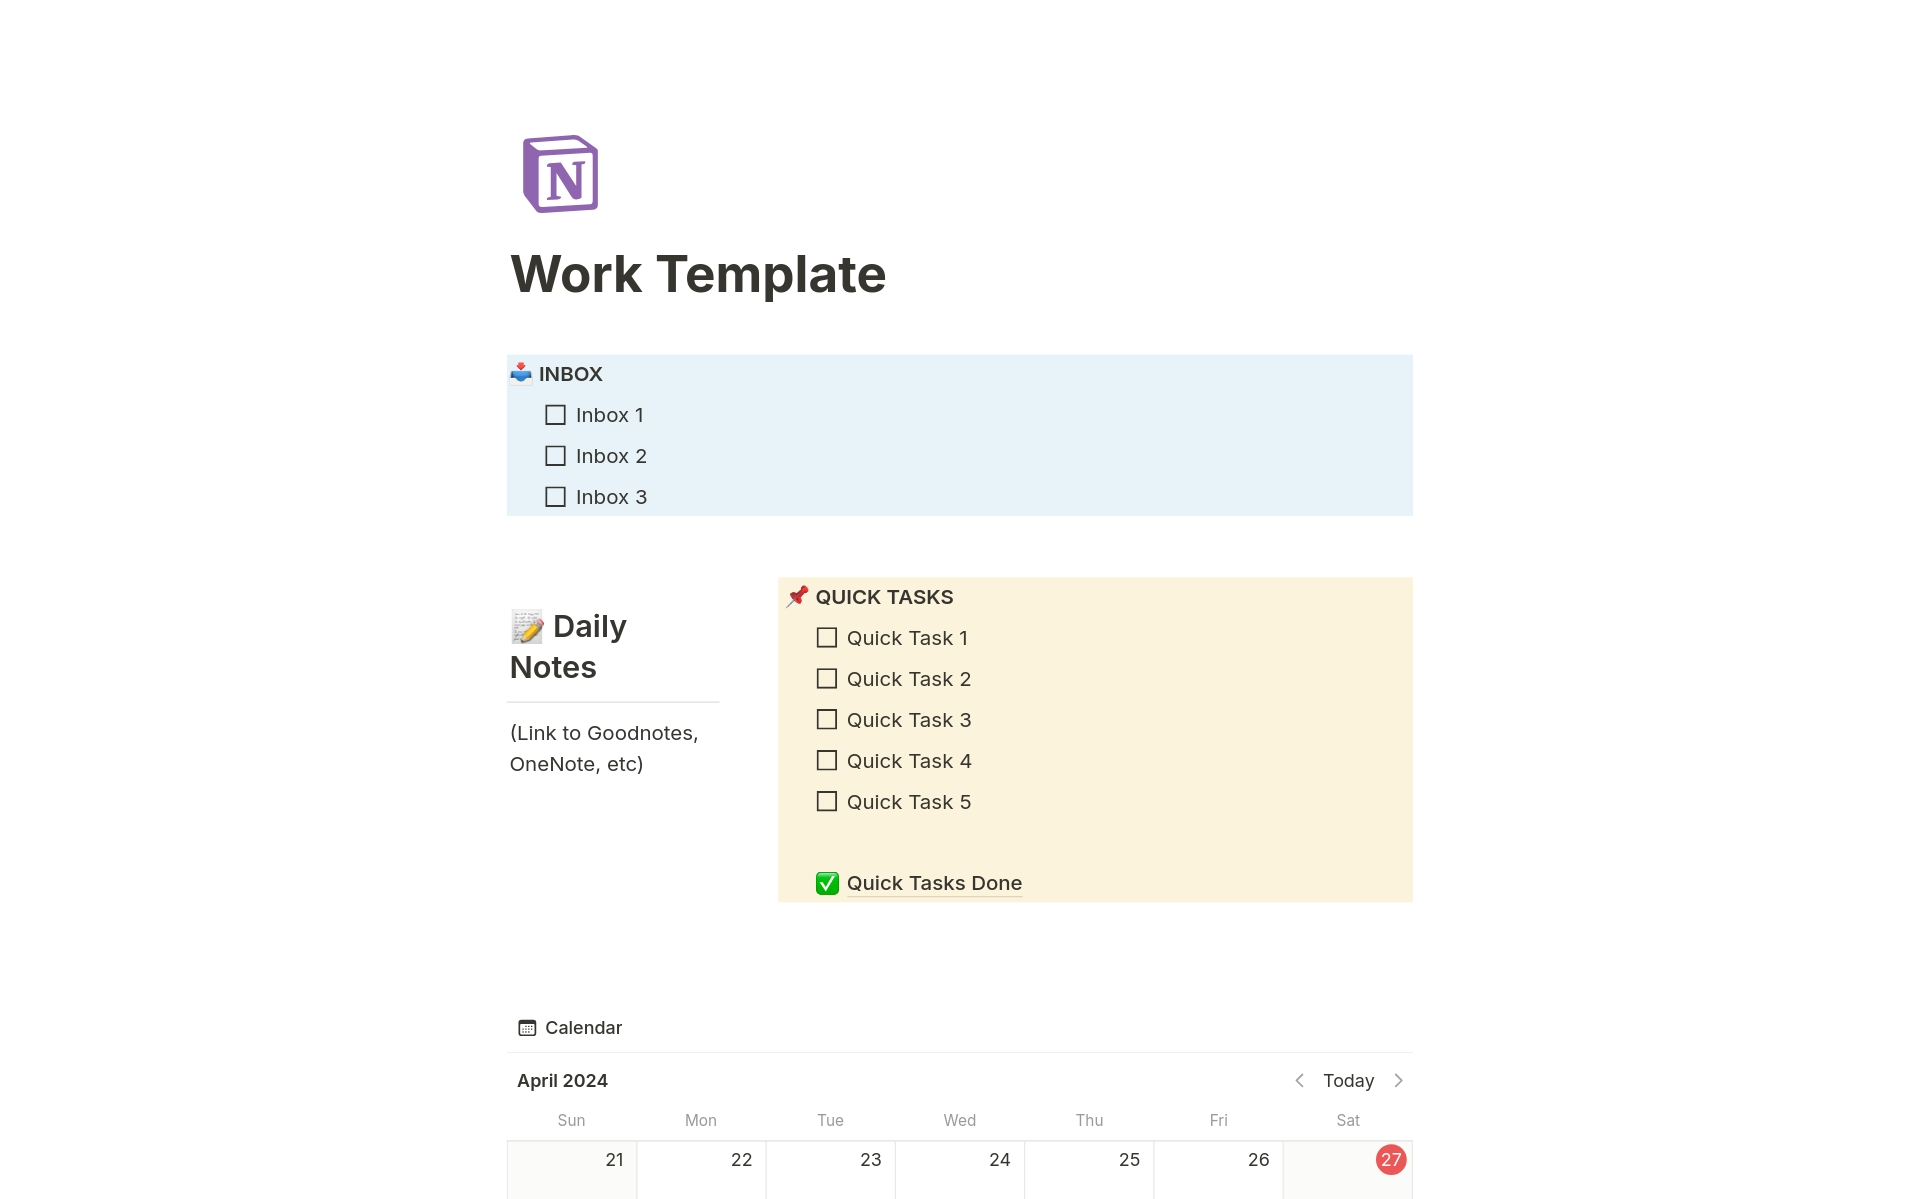 This is a simple to use template design for work, specially for those who work in a project basis.
The incoming informations should be added to the ‘INBOX’, then to ‘Quick Tasks’ if takes few time and to Tasks if are part of a Project. Each Project page also has specific tasks.